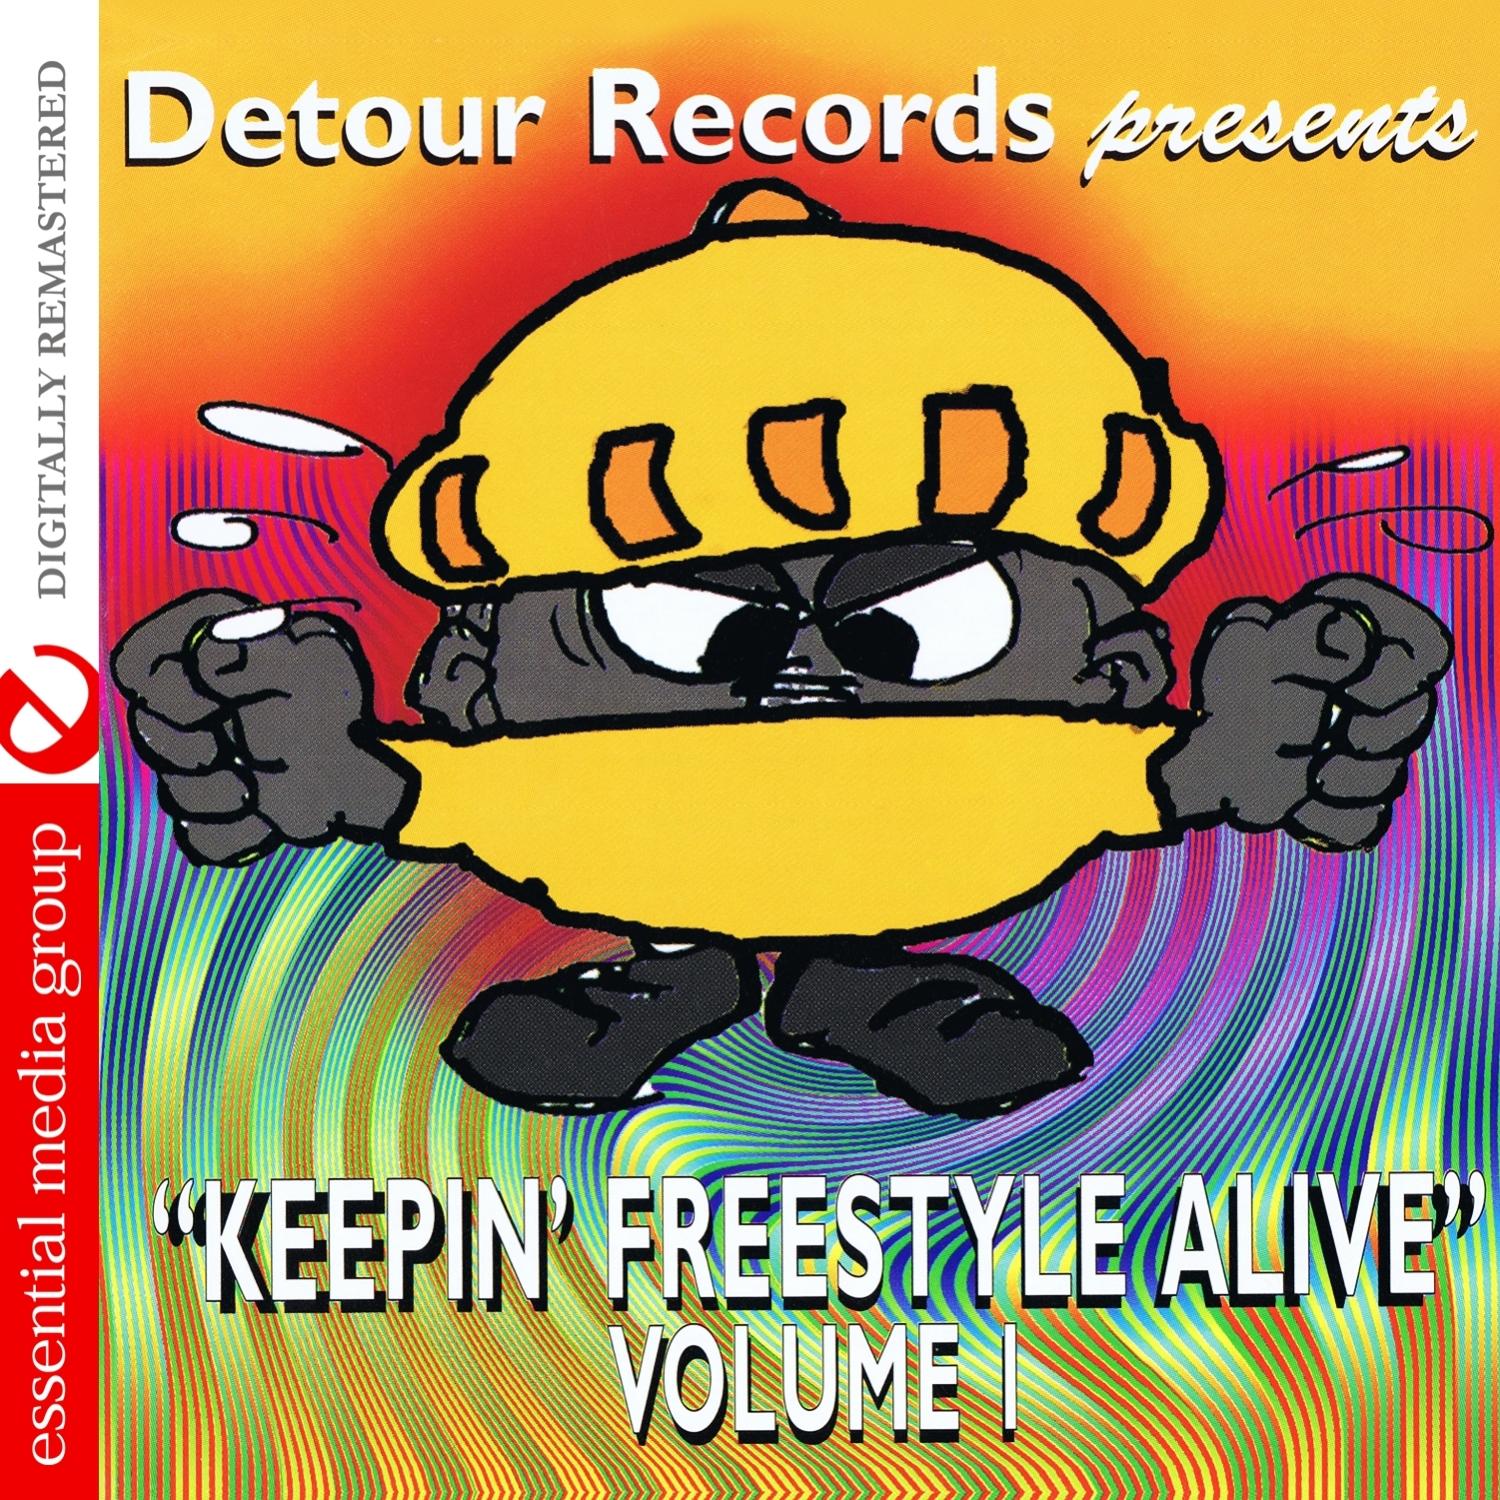 Detour Records Presents Keeping Freestyle Alive Vol. 1 (Digitally Remastered)